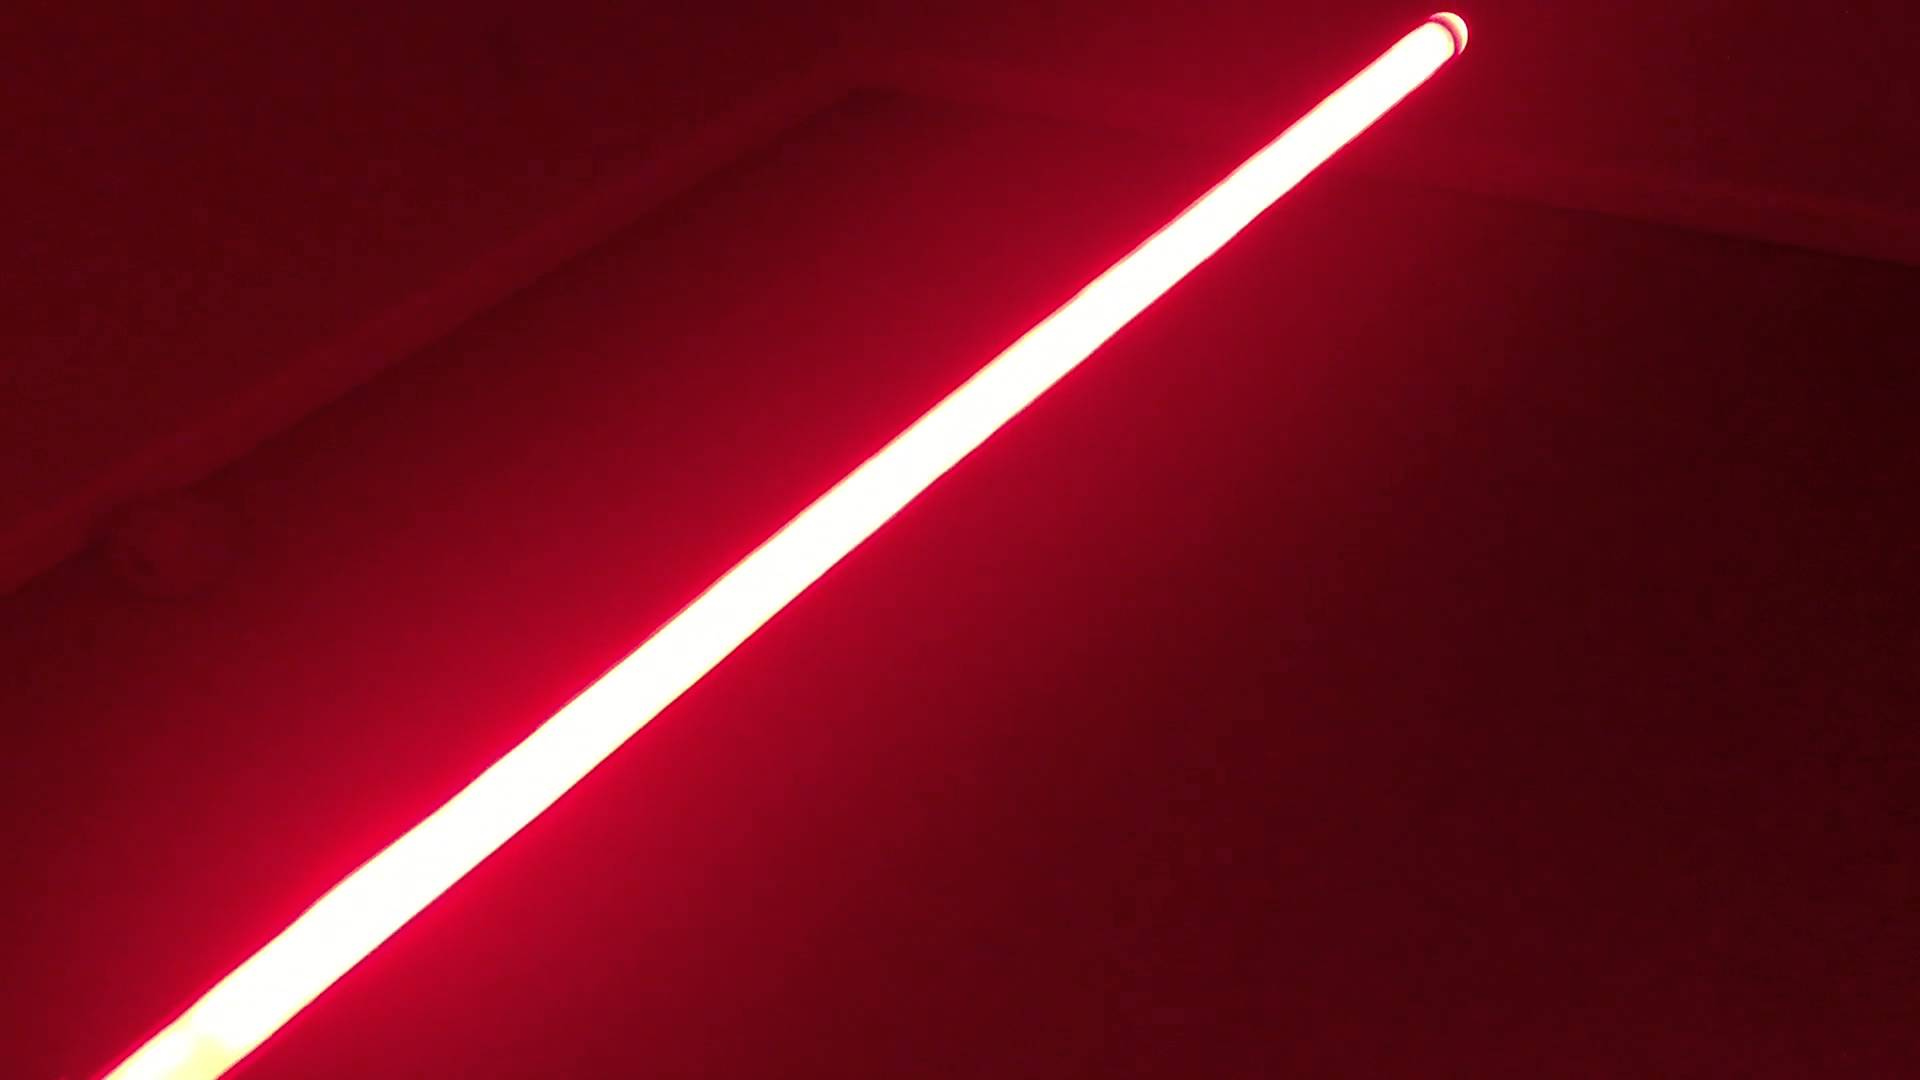 Red Lightsaber Blade with Yellow Flash on Clash Test Lights Off